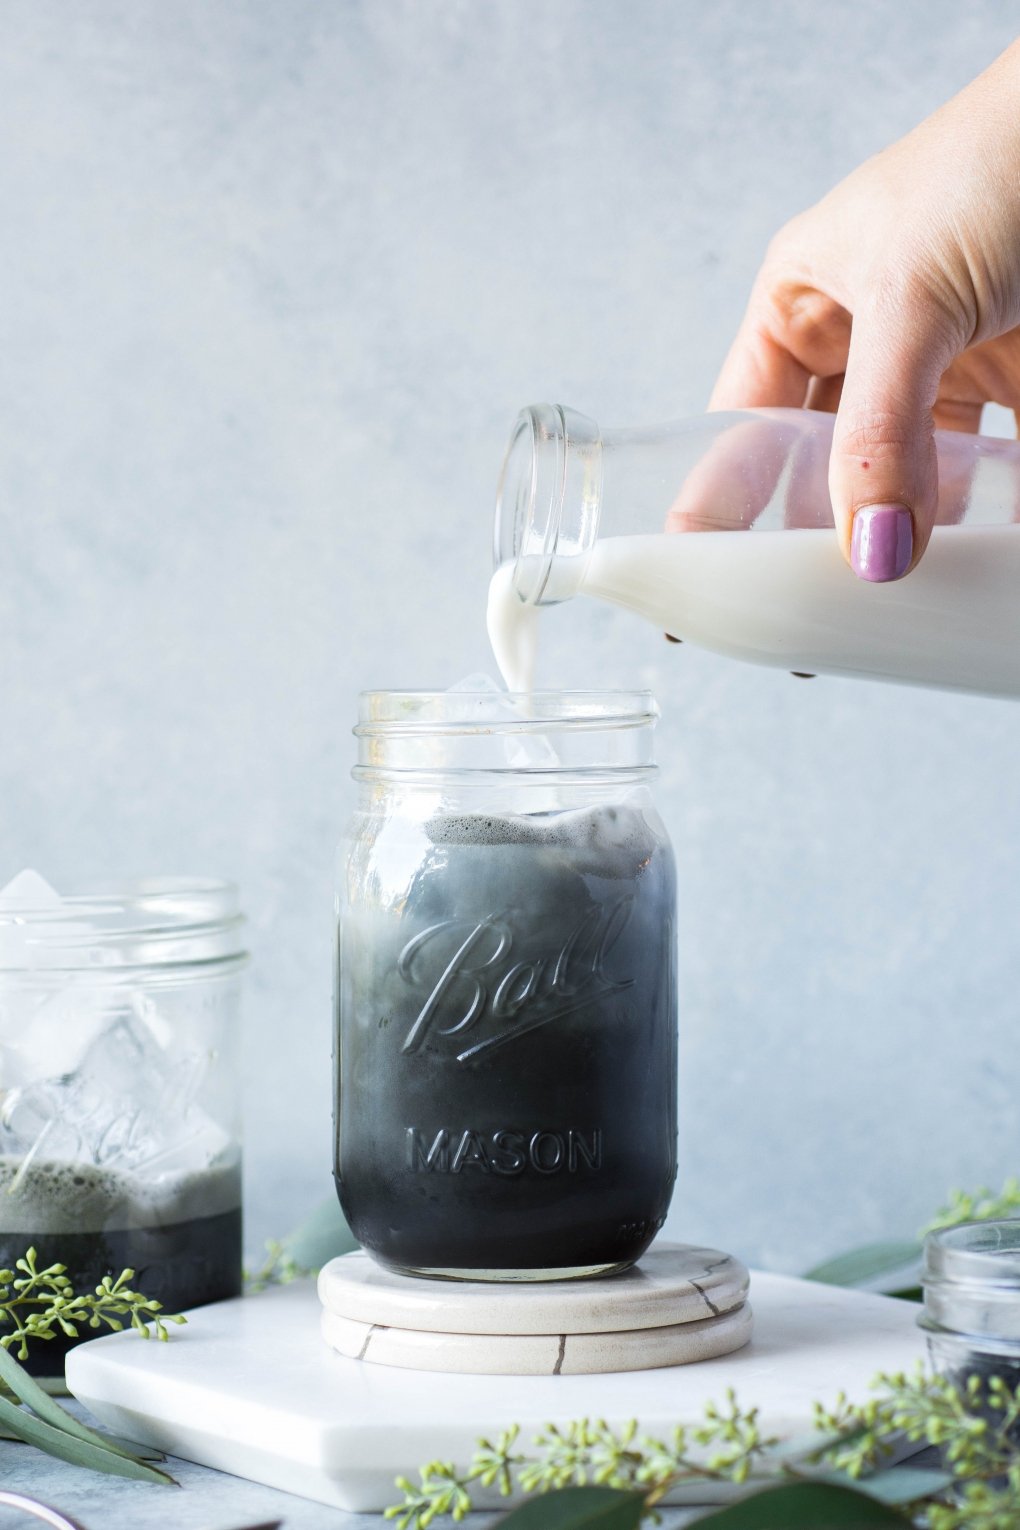 Pouring almond milk into an iced activated charcoal latte.